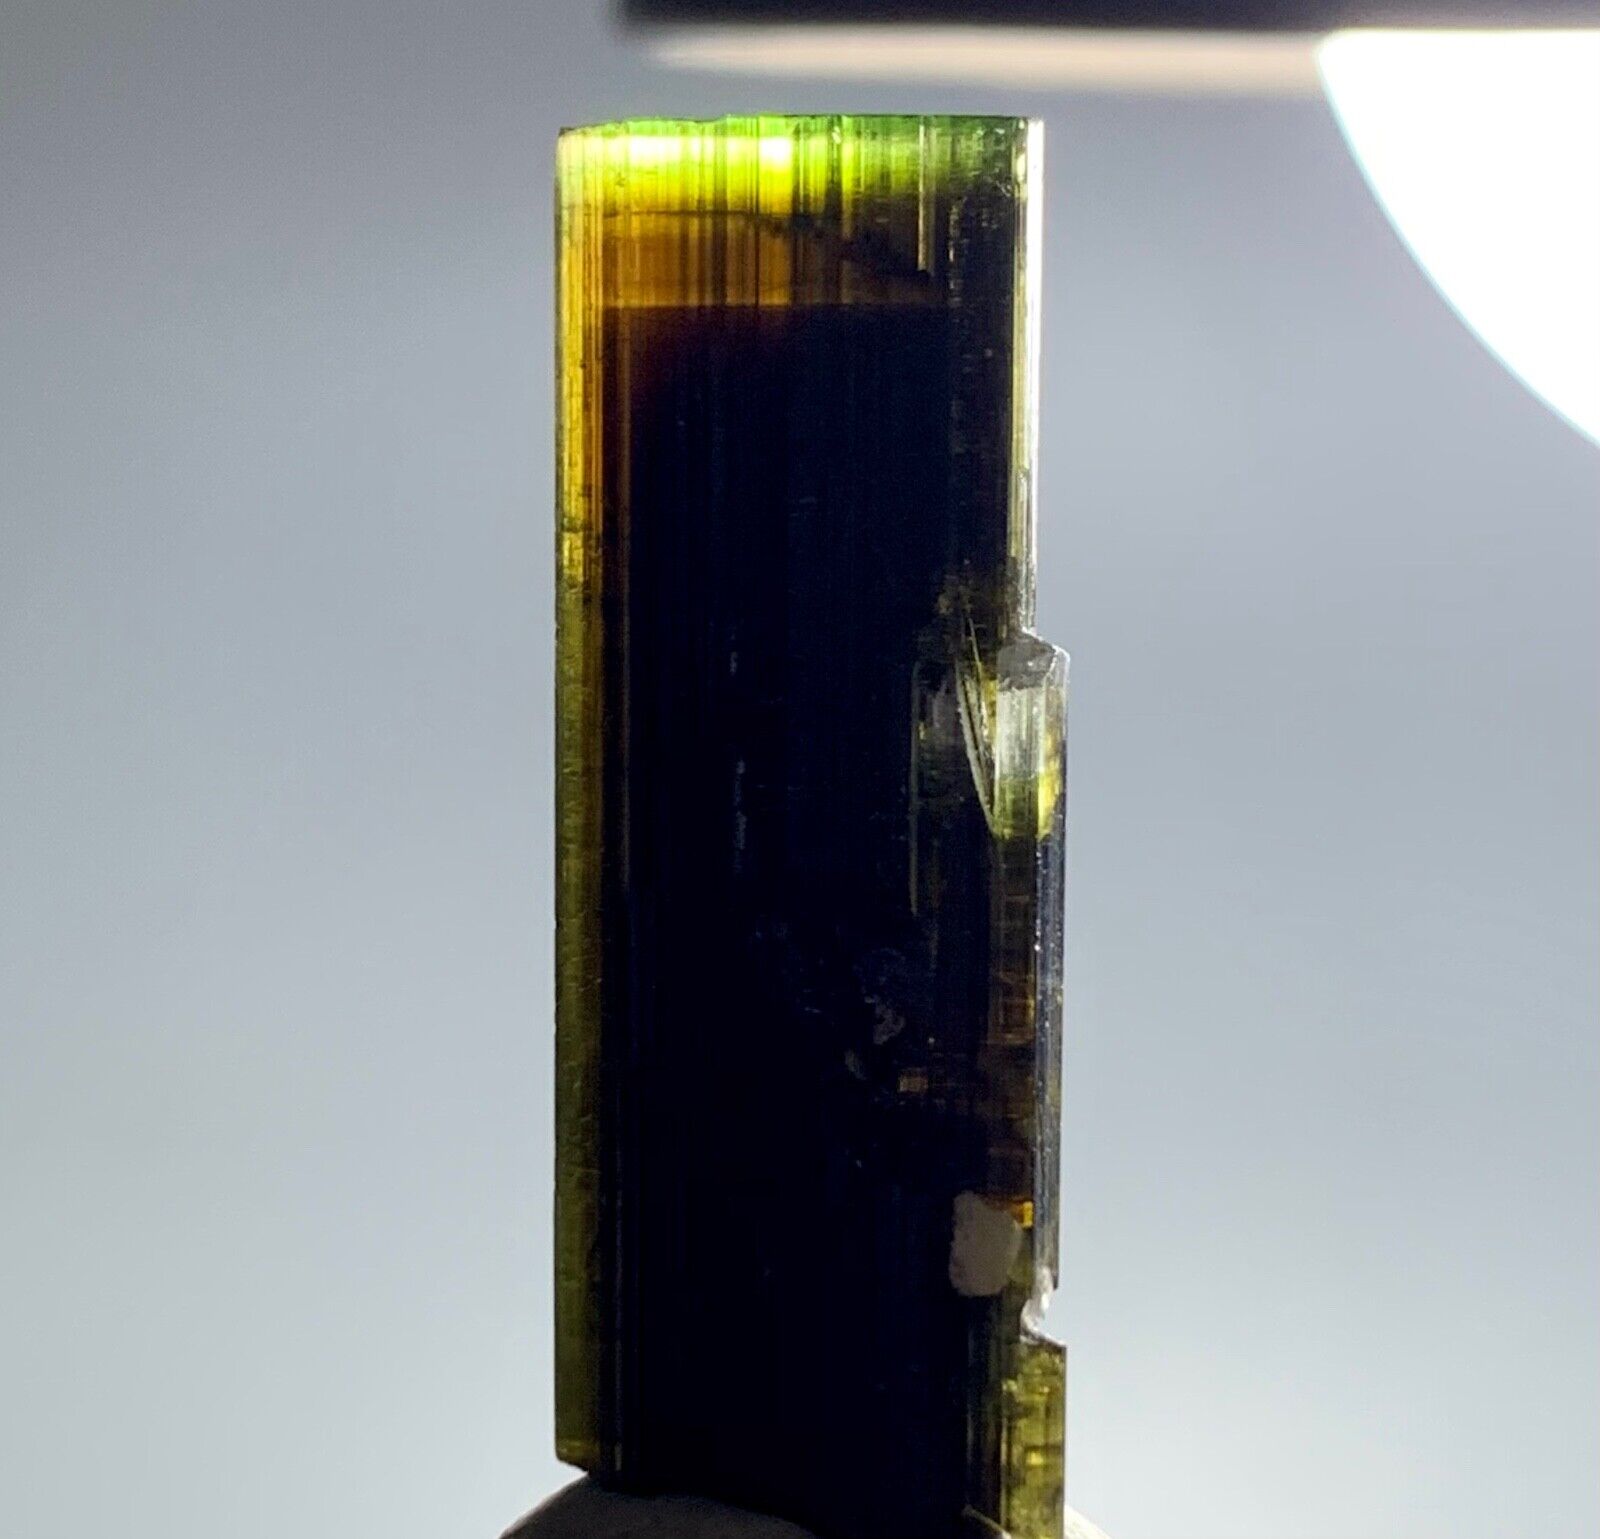 64 Cts Green Cap Tourmaline Crystal from Pakistan.z